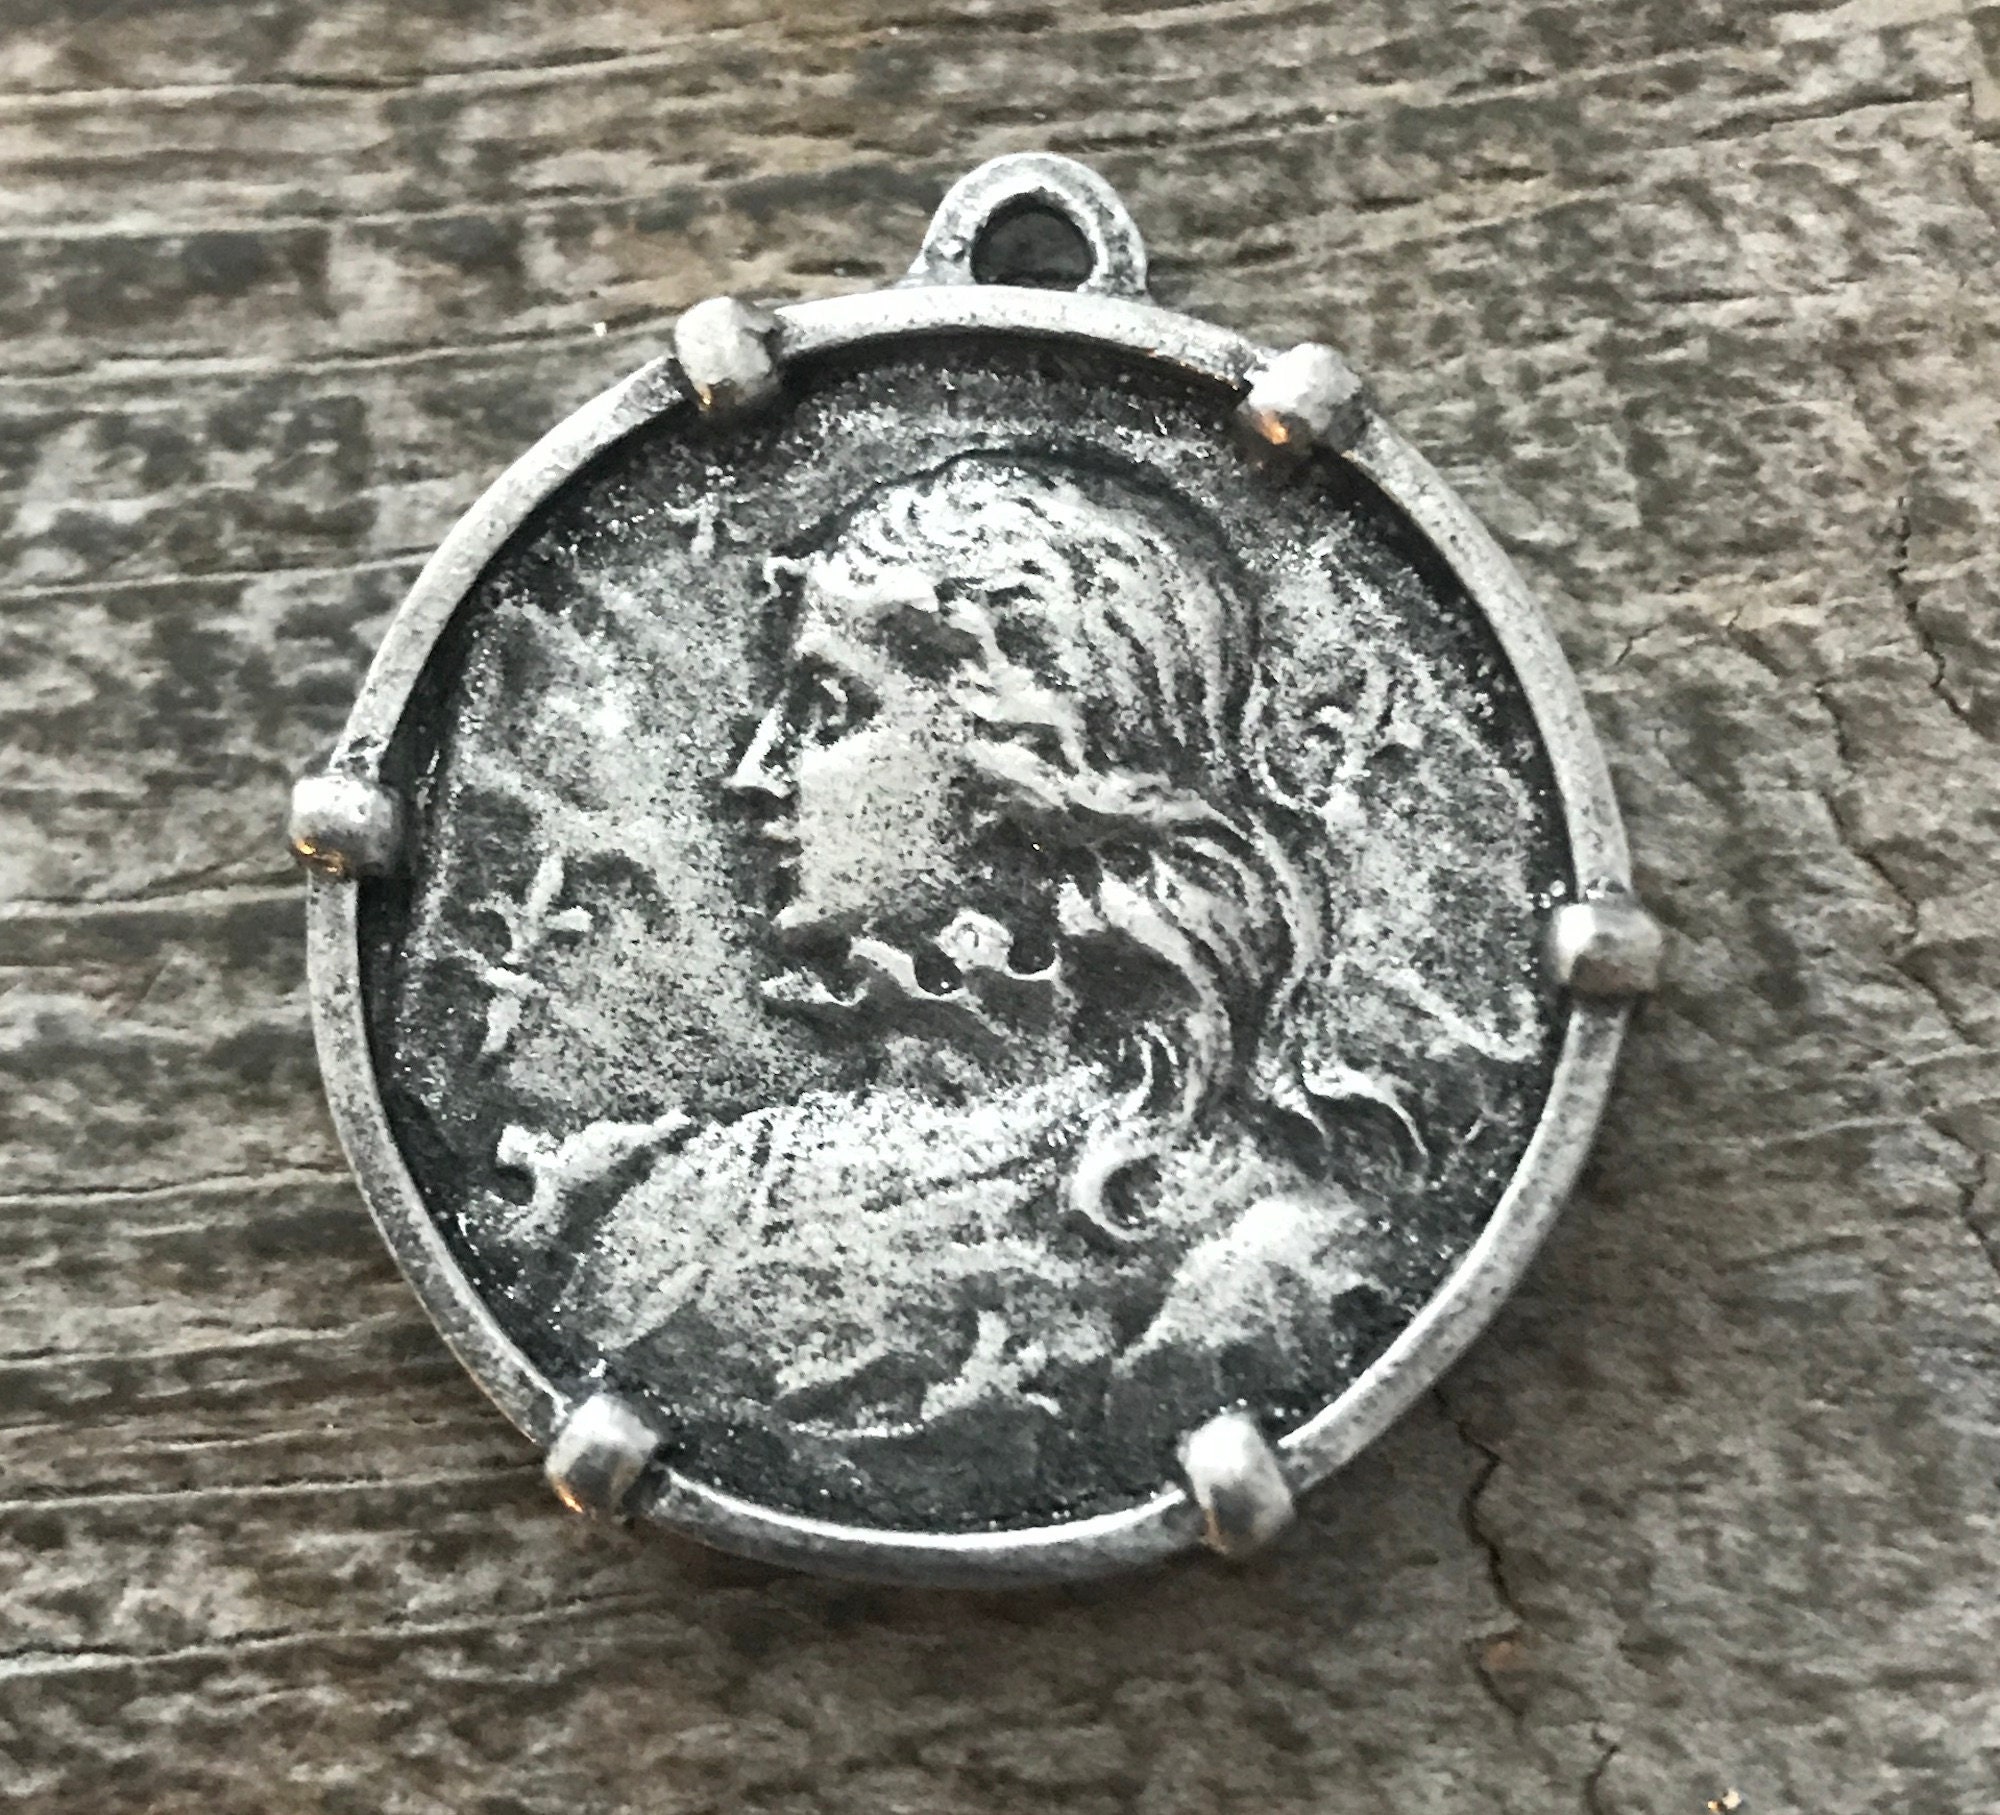 Brave Woman PW-6124 Antiqued Silver Charm Pendant Saint of Soldiers Religious Catholic Jewelry Supplies Joan of Arc Medal with Frame